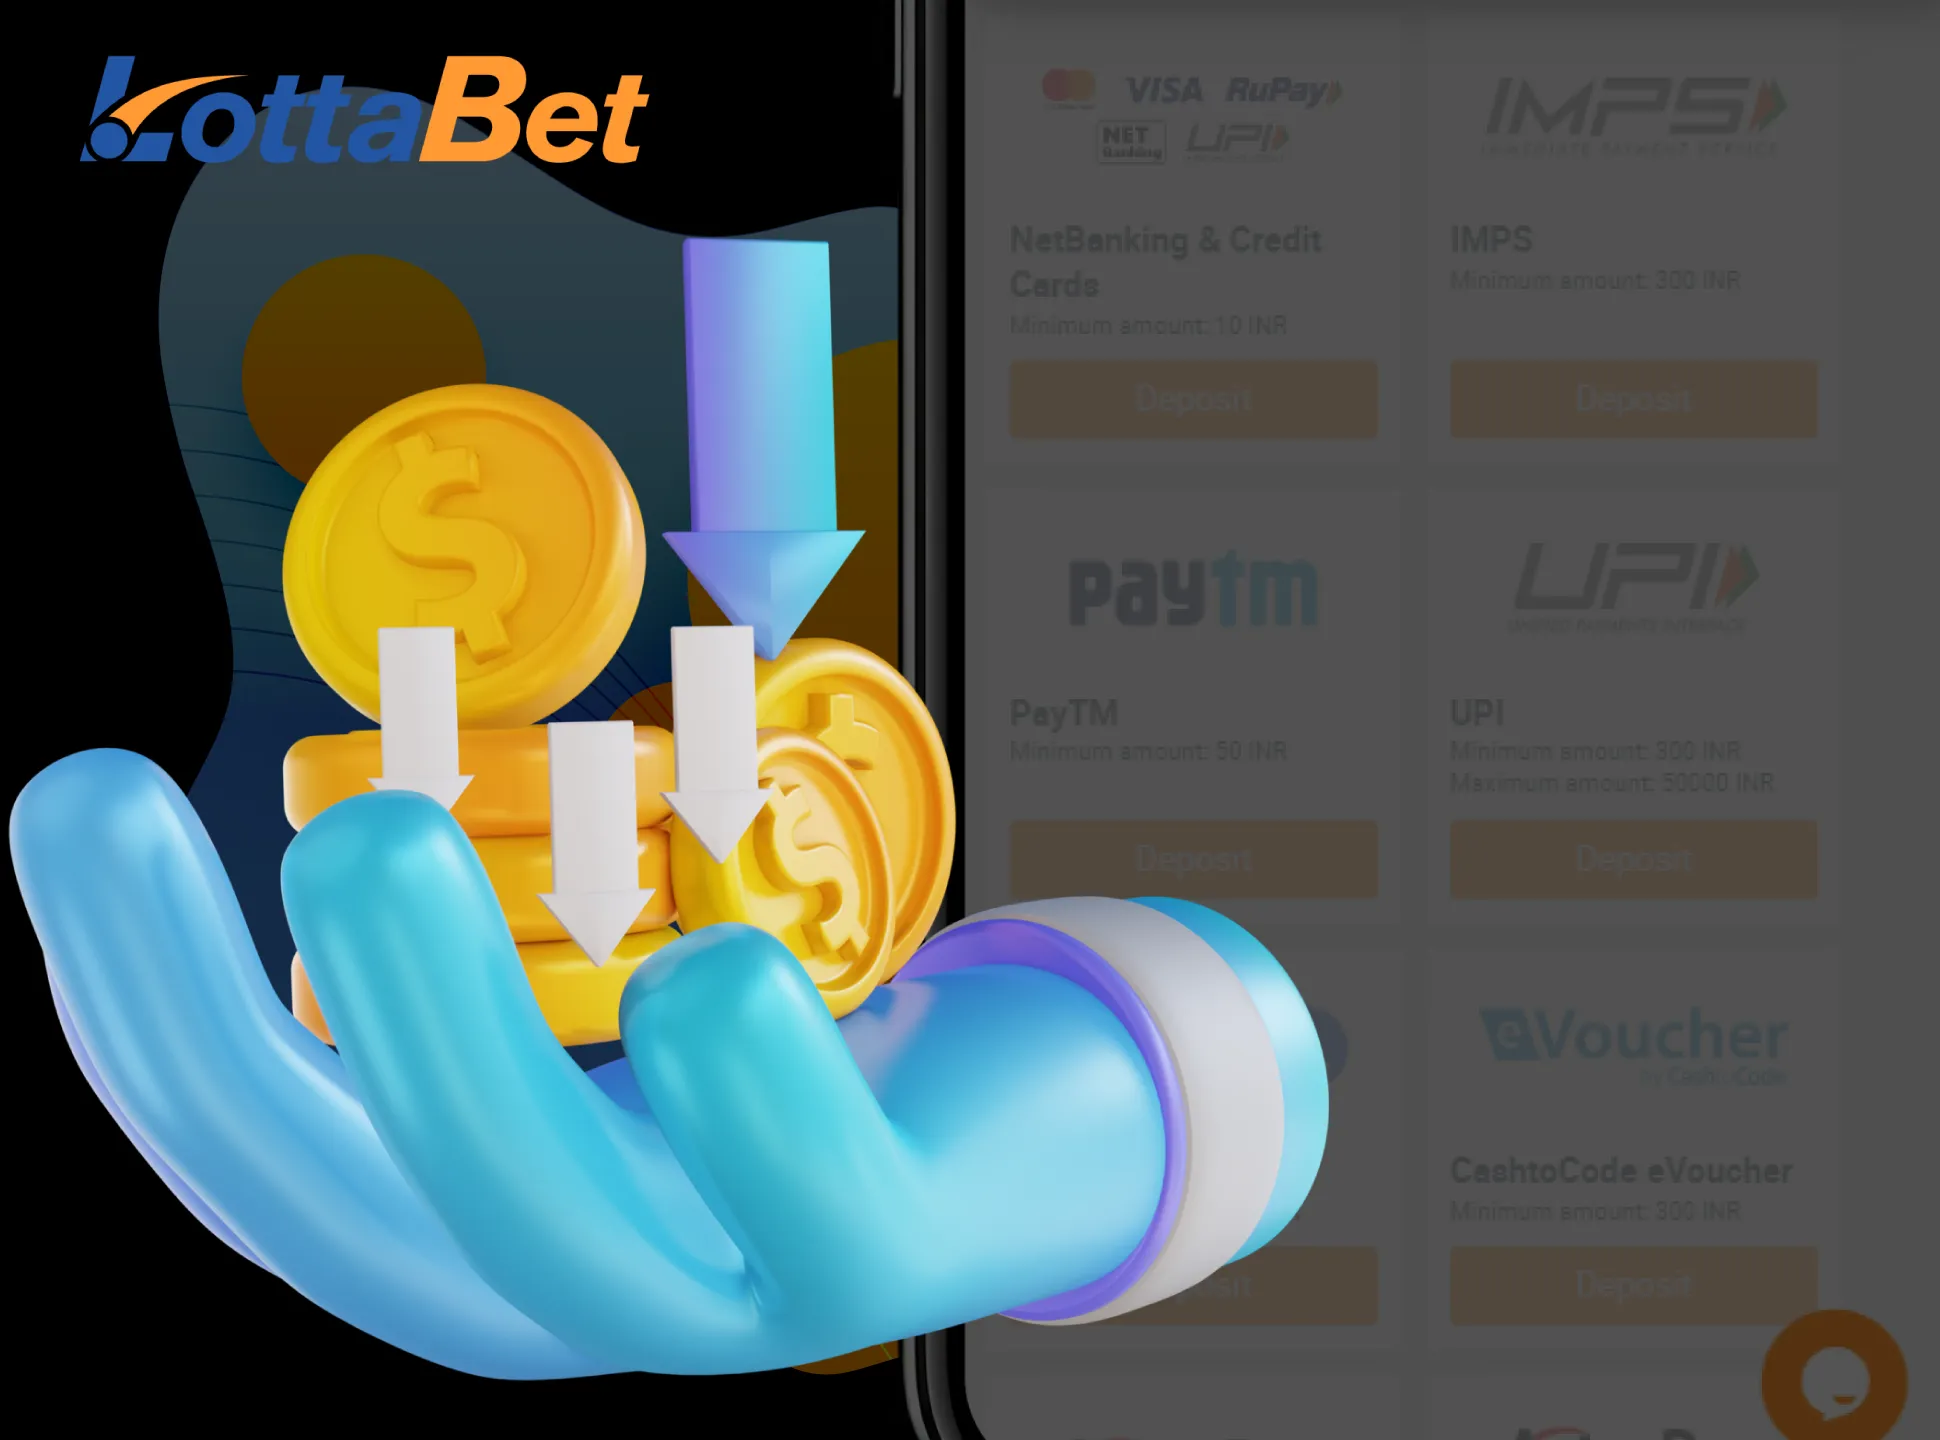 Indian players can deposit and withdraw from Lottbaet in rupees.